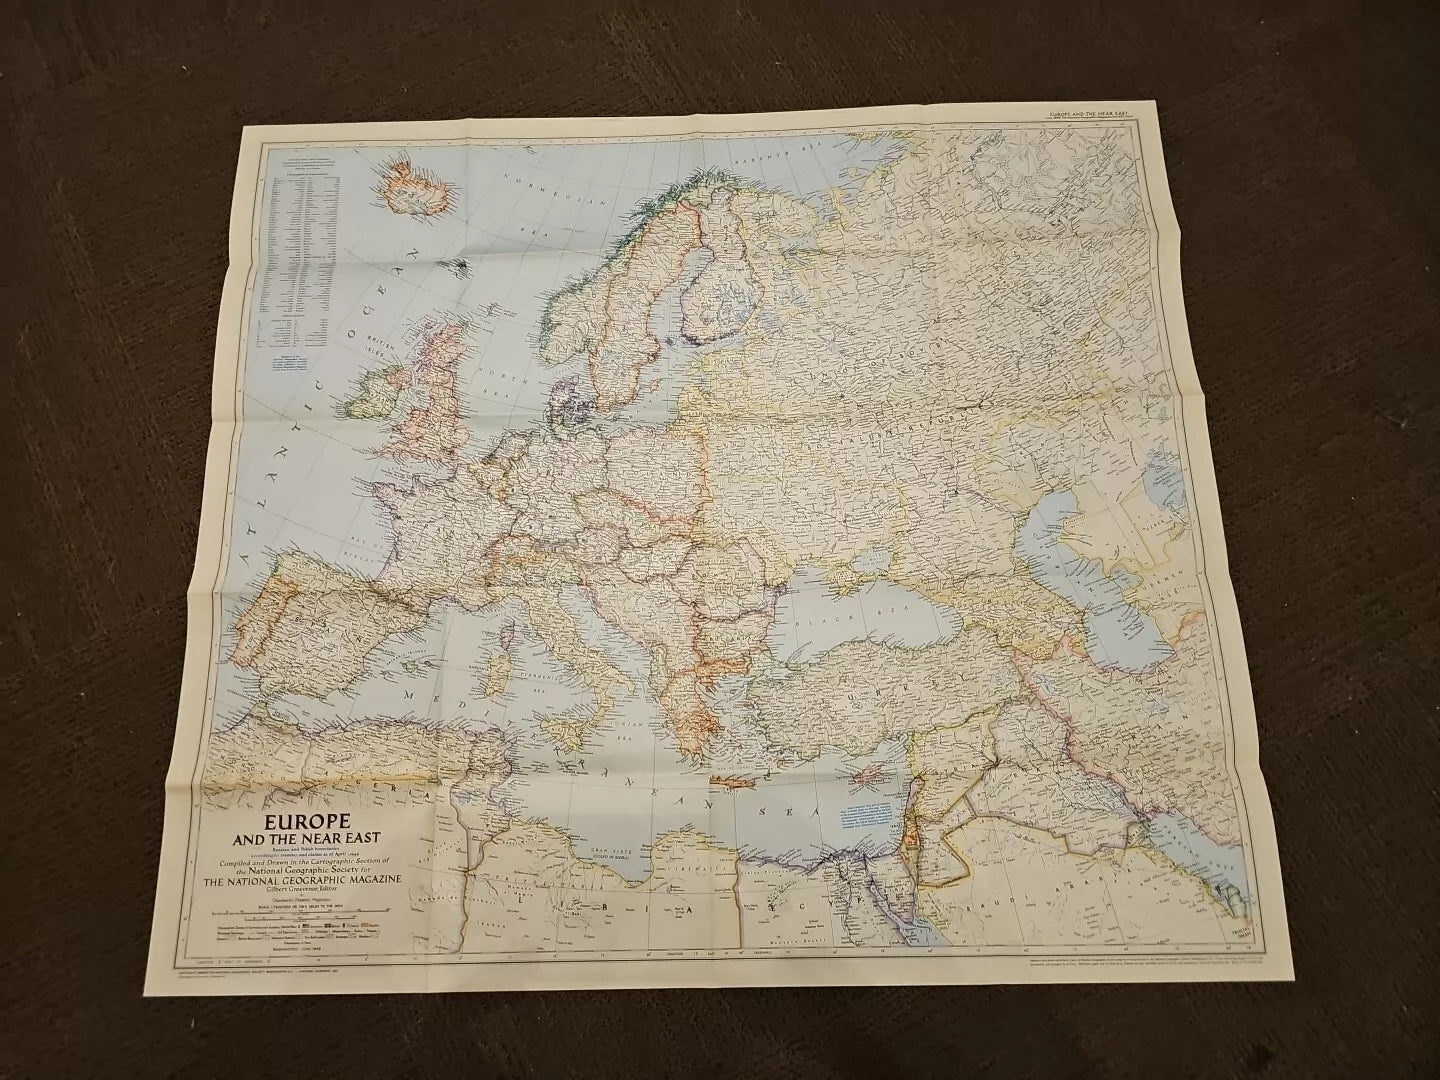 National Geographic Map - Europe and The Near East (1949)